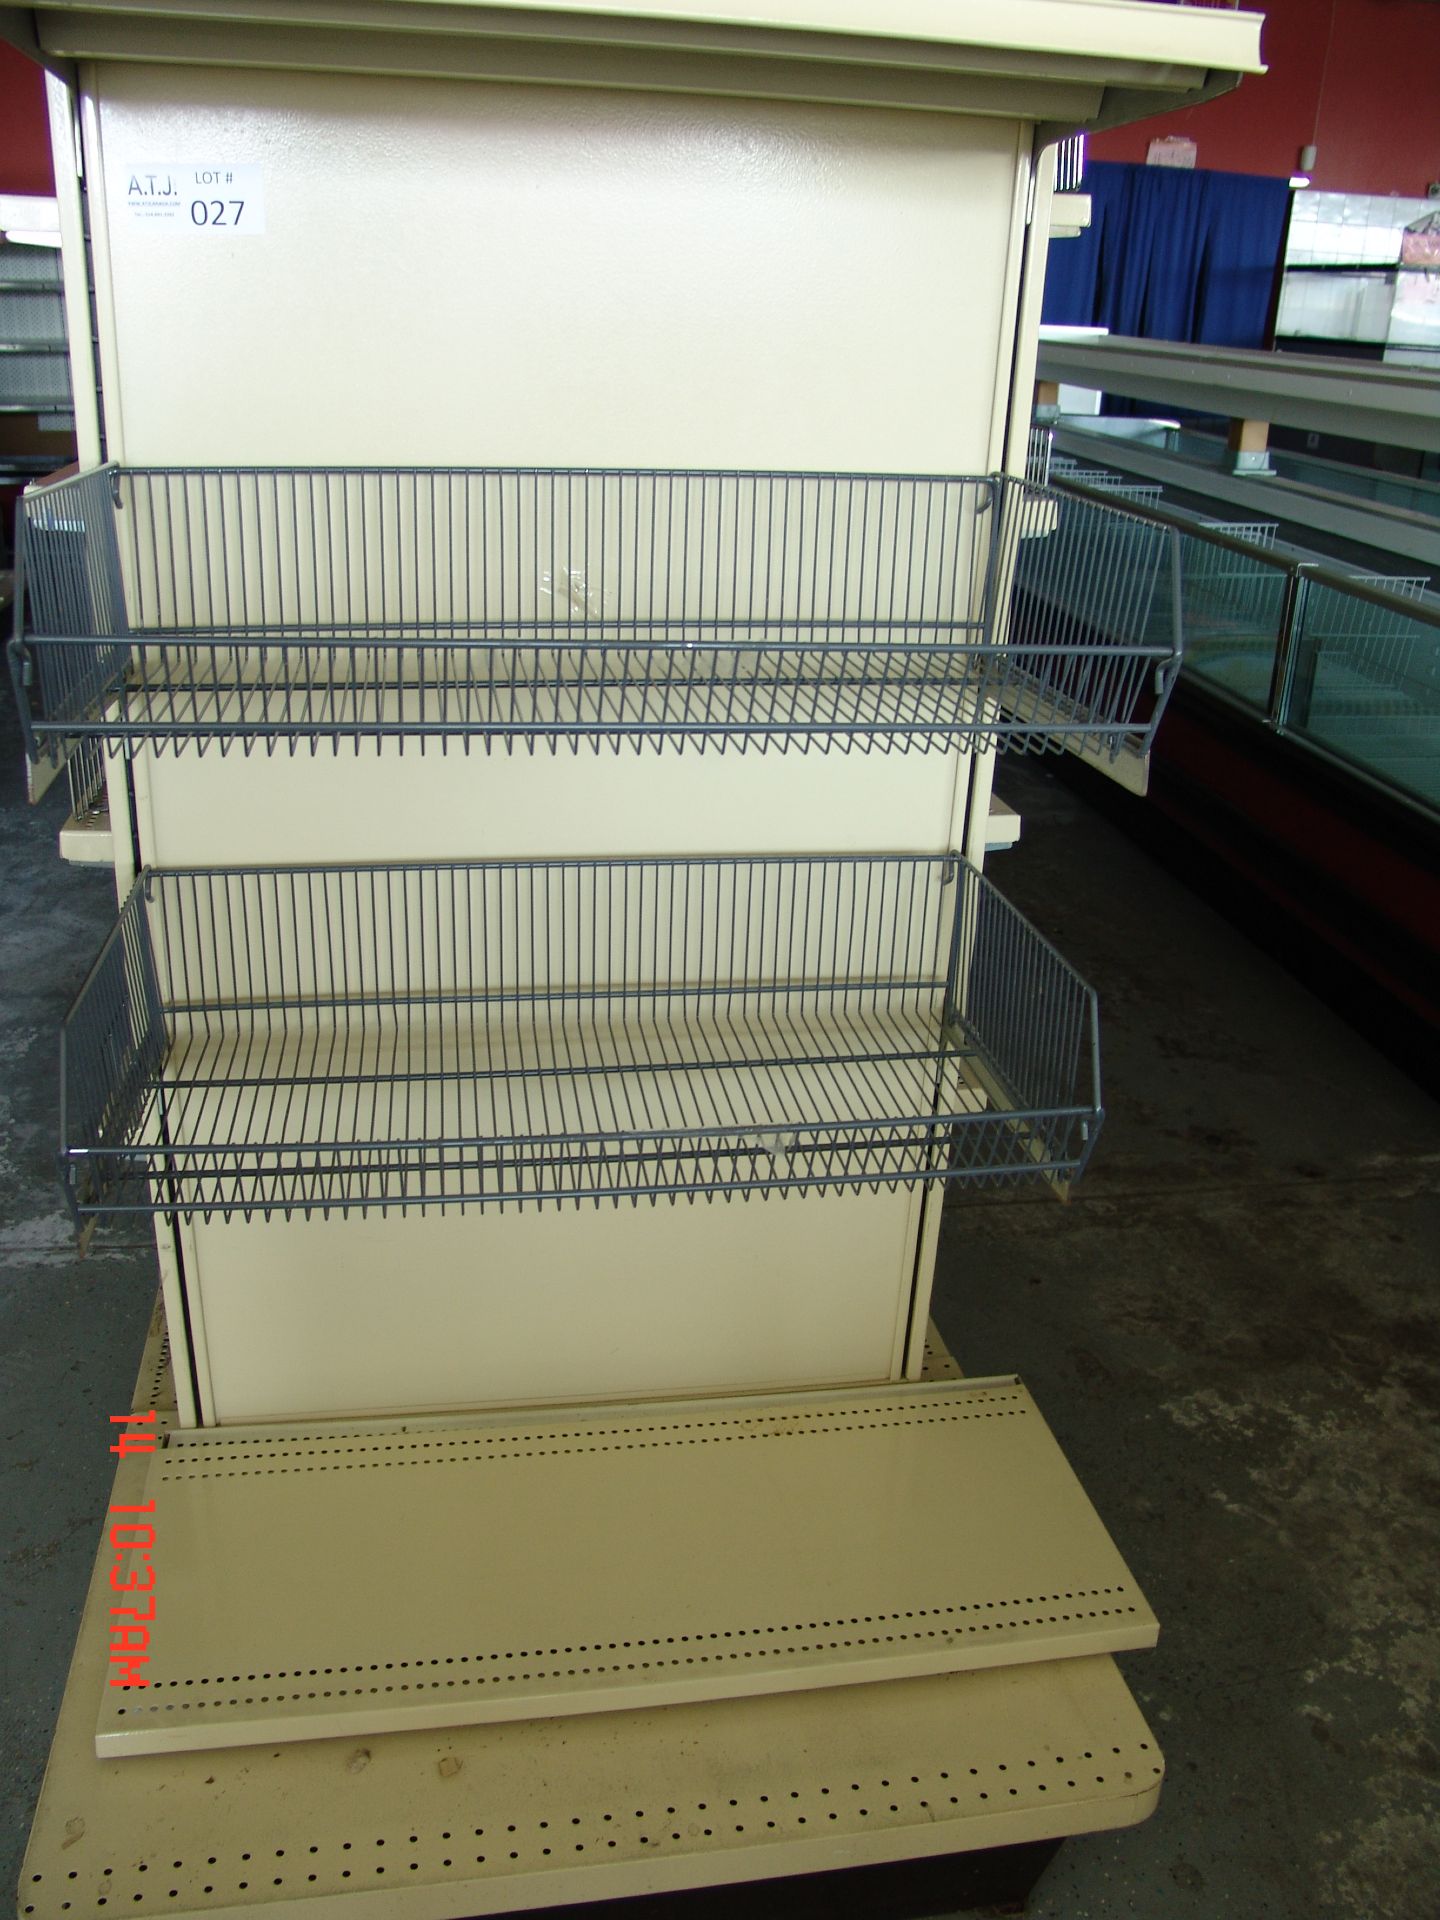 Beige Metal Retail Gondola Display Shelving single sided with one shelf and two baskets 31lx14wx61h